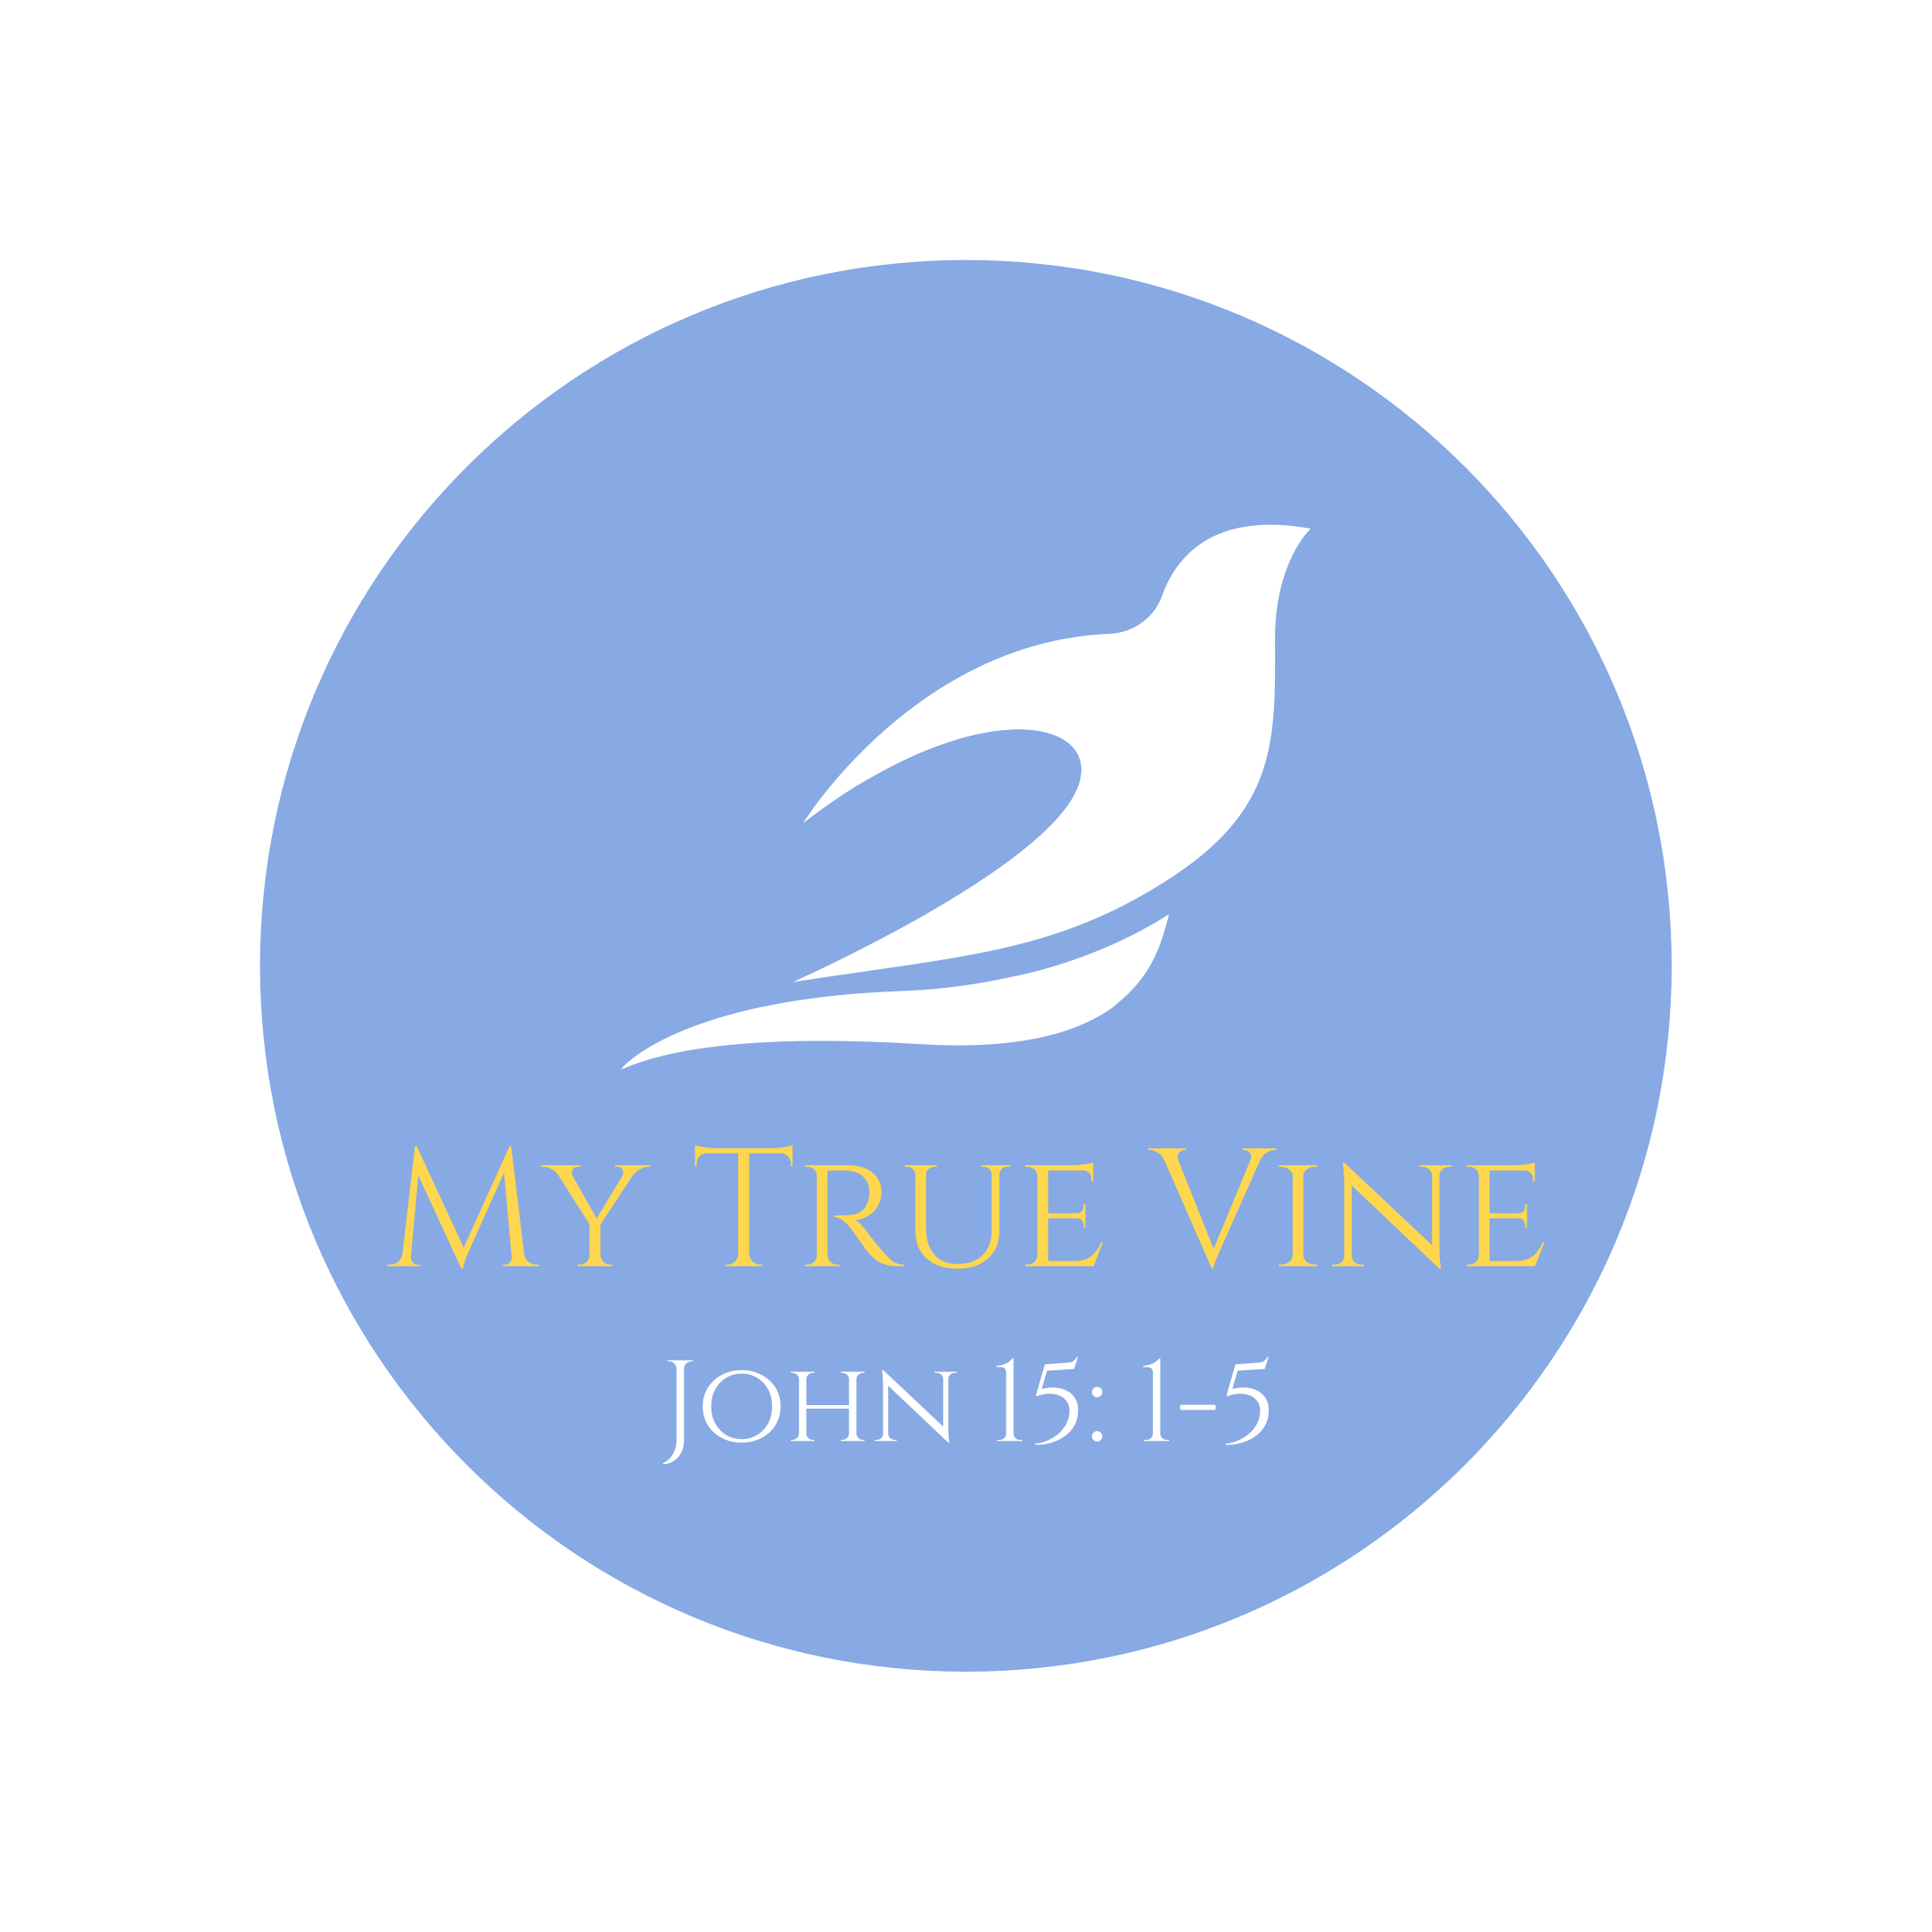 My True Vine logo with a white dove on a blue background. The white dove represents the Holy Spirit who testifies to Jesus' statement: "I am the true vine and my father is the gardener ...". 